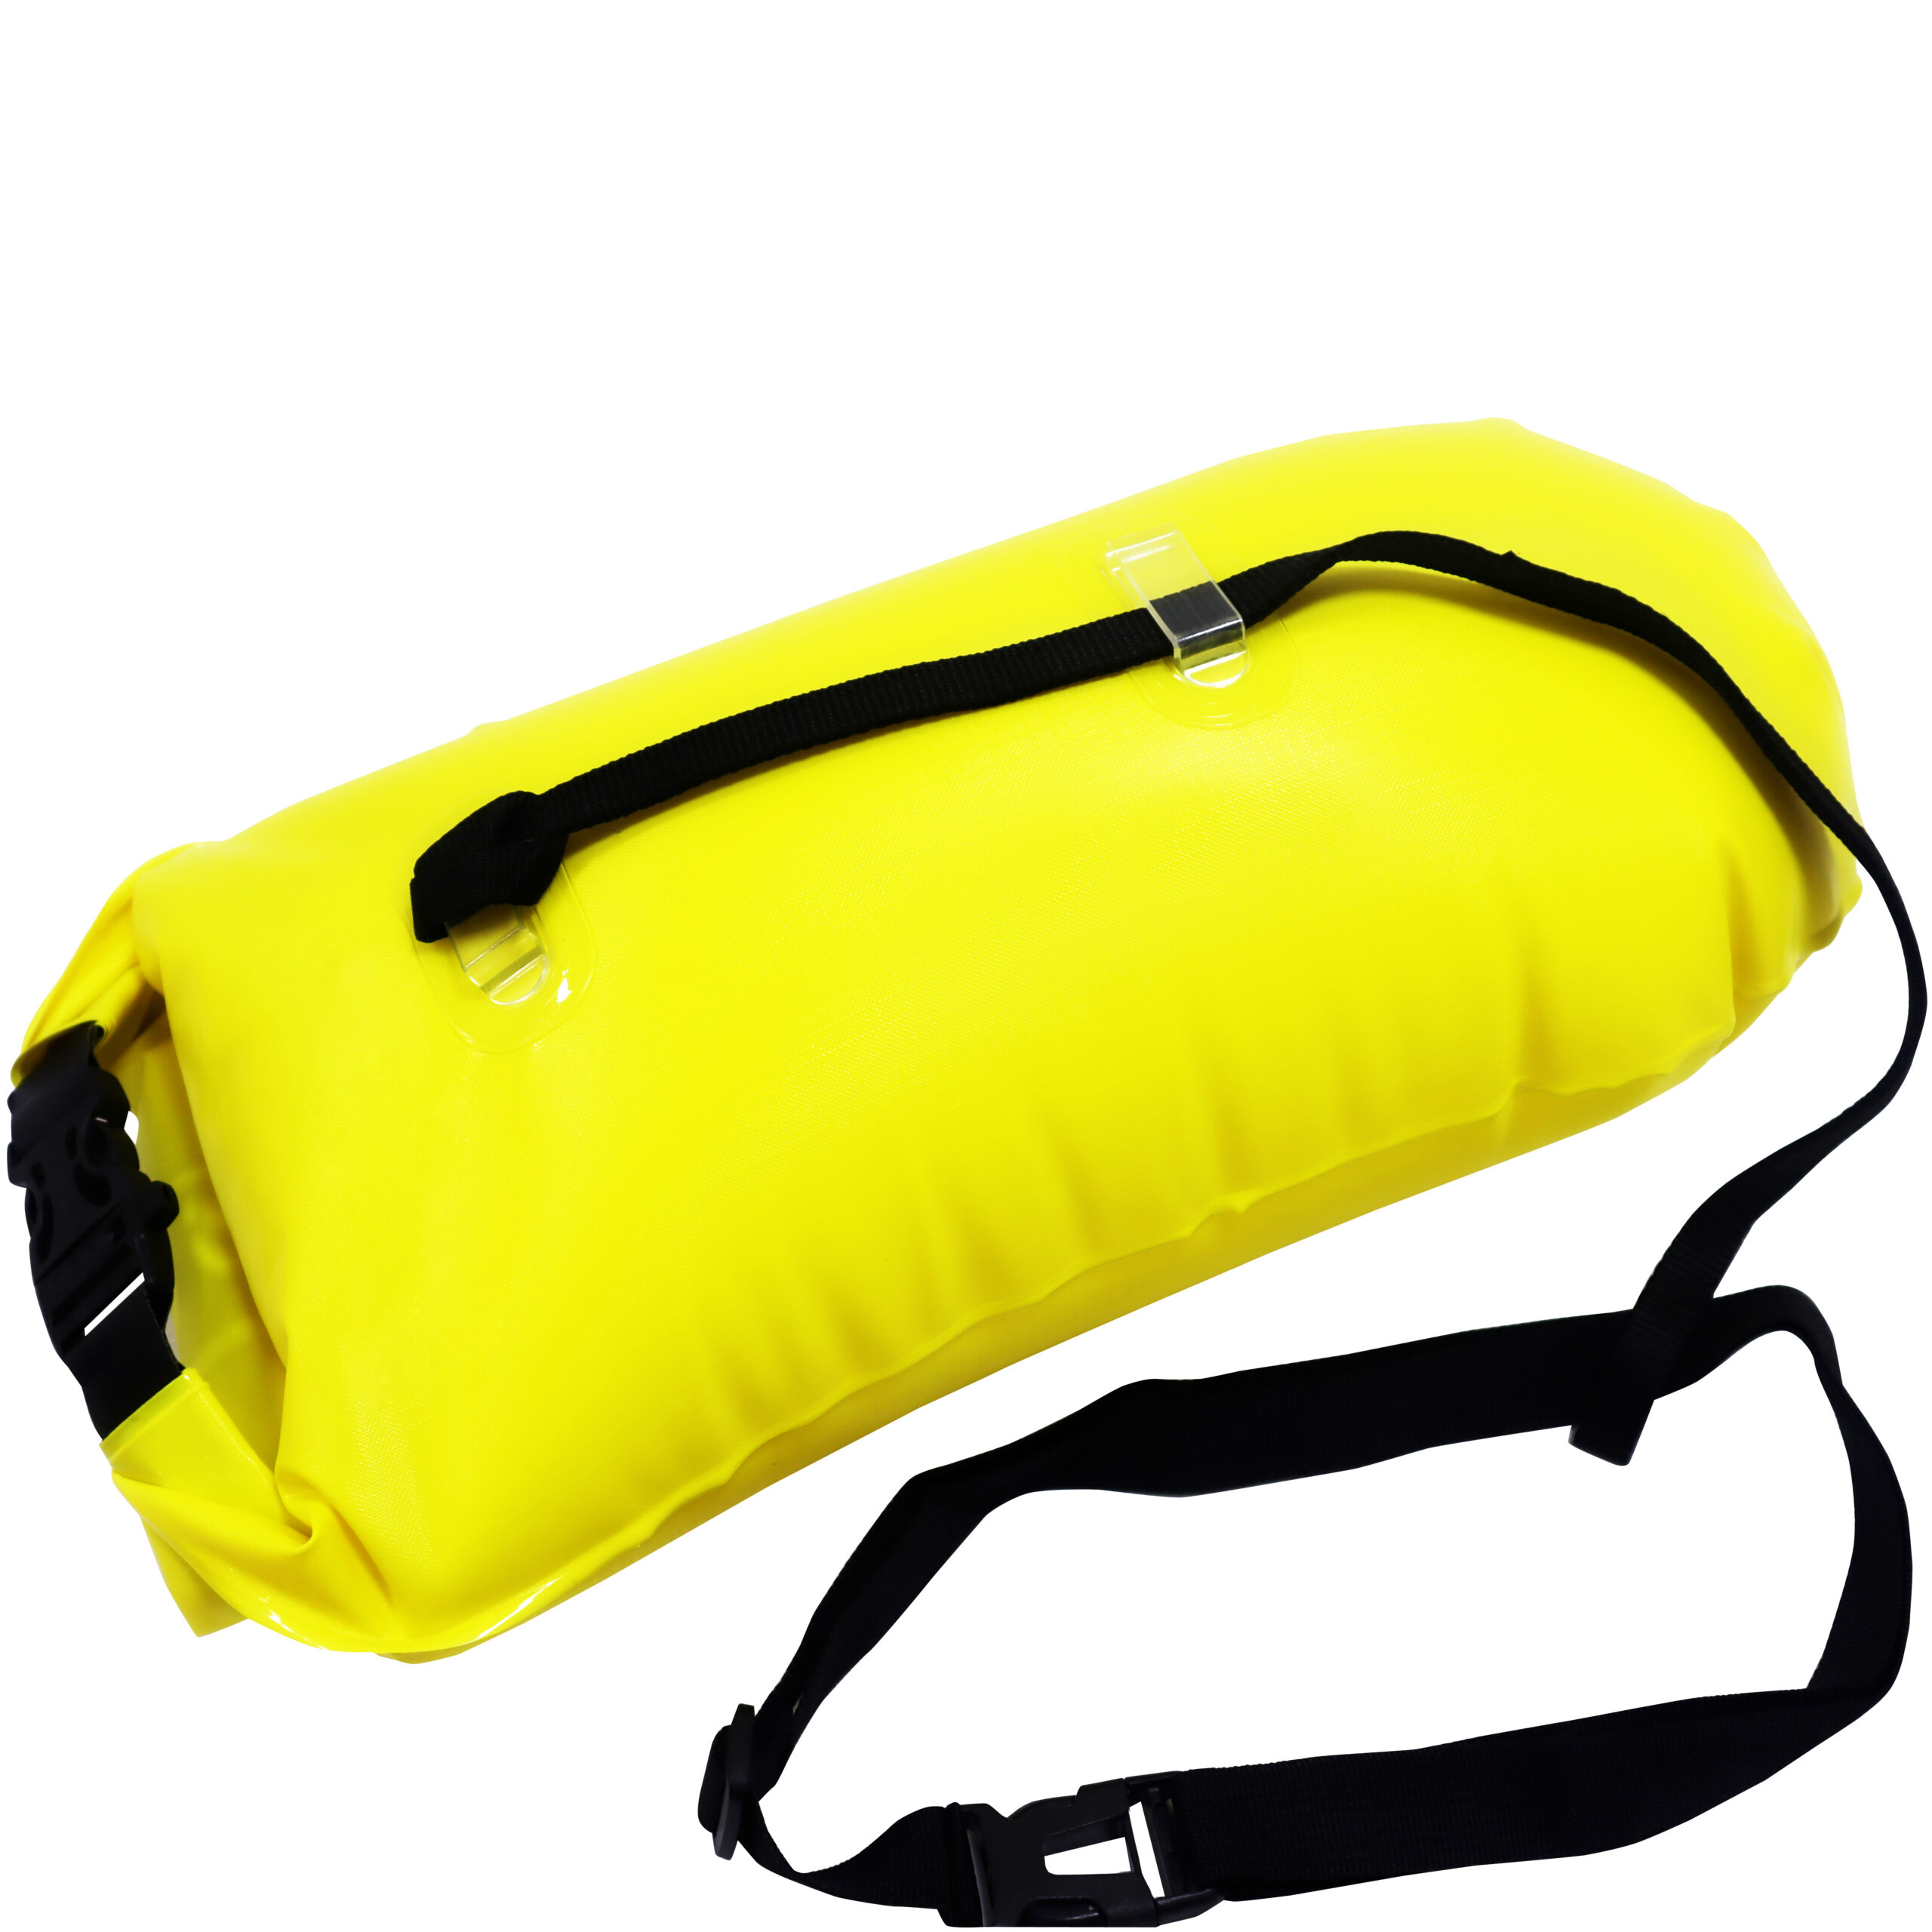 Swim Buoy for Open Water – High Visibility Yellow Swim Float